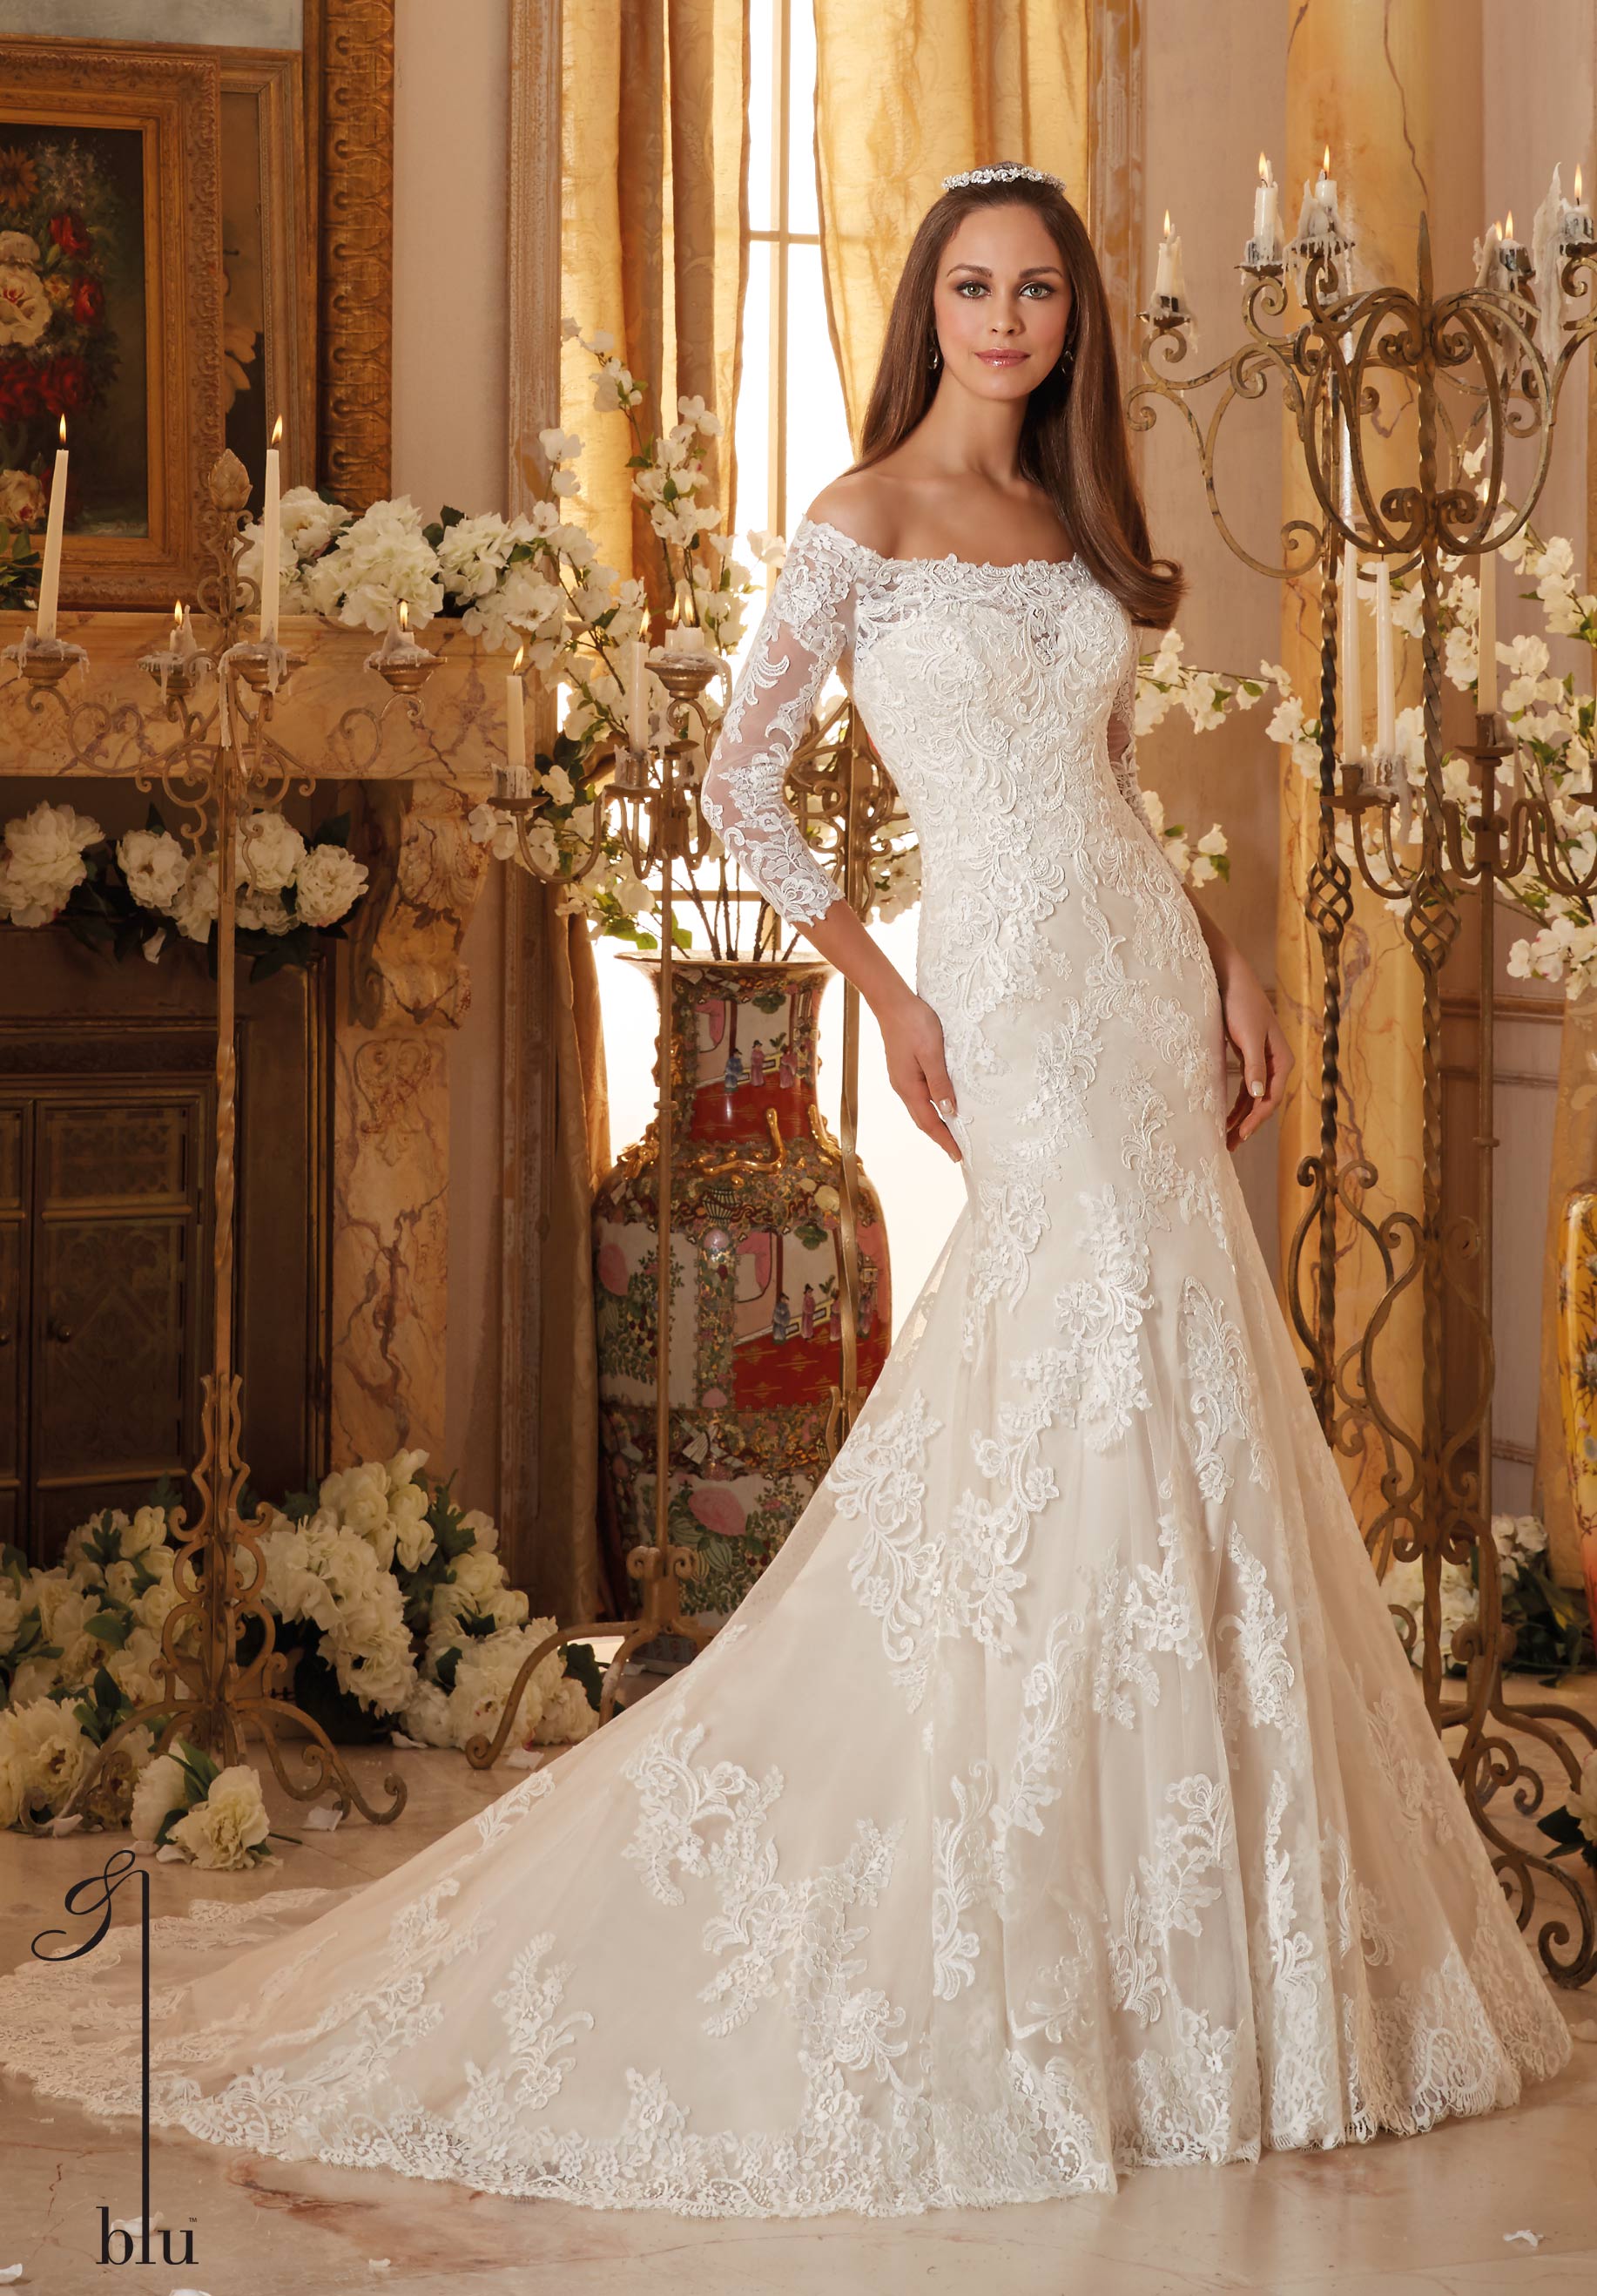 Top Mori Lee Blush Wedding Dress of all time Check it out now 